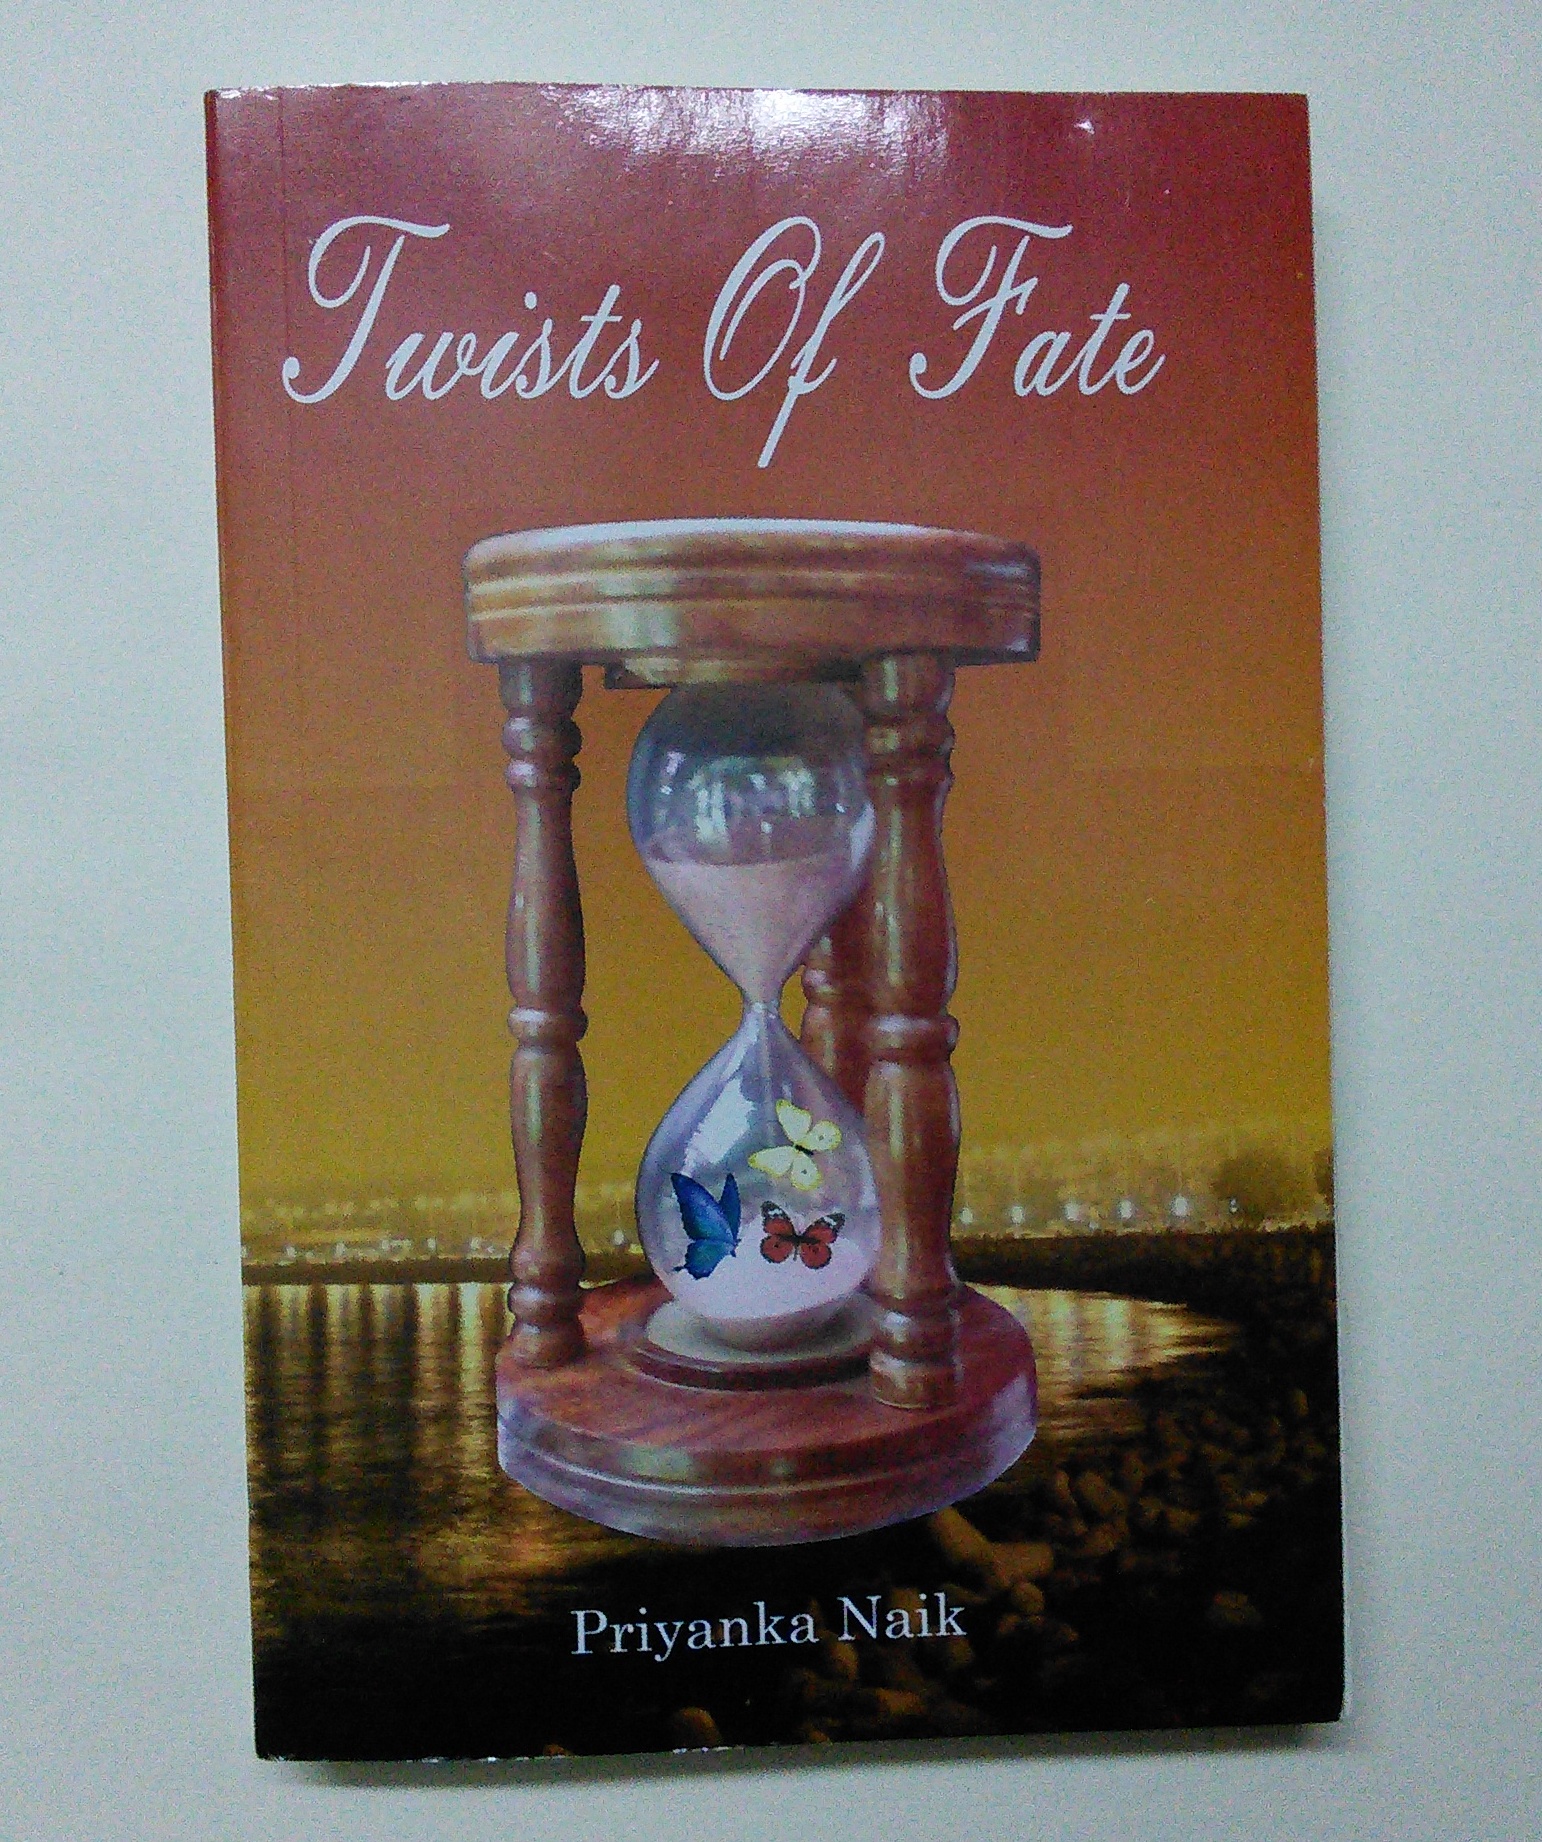 Link to Book Review - Twists of Fate